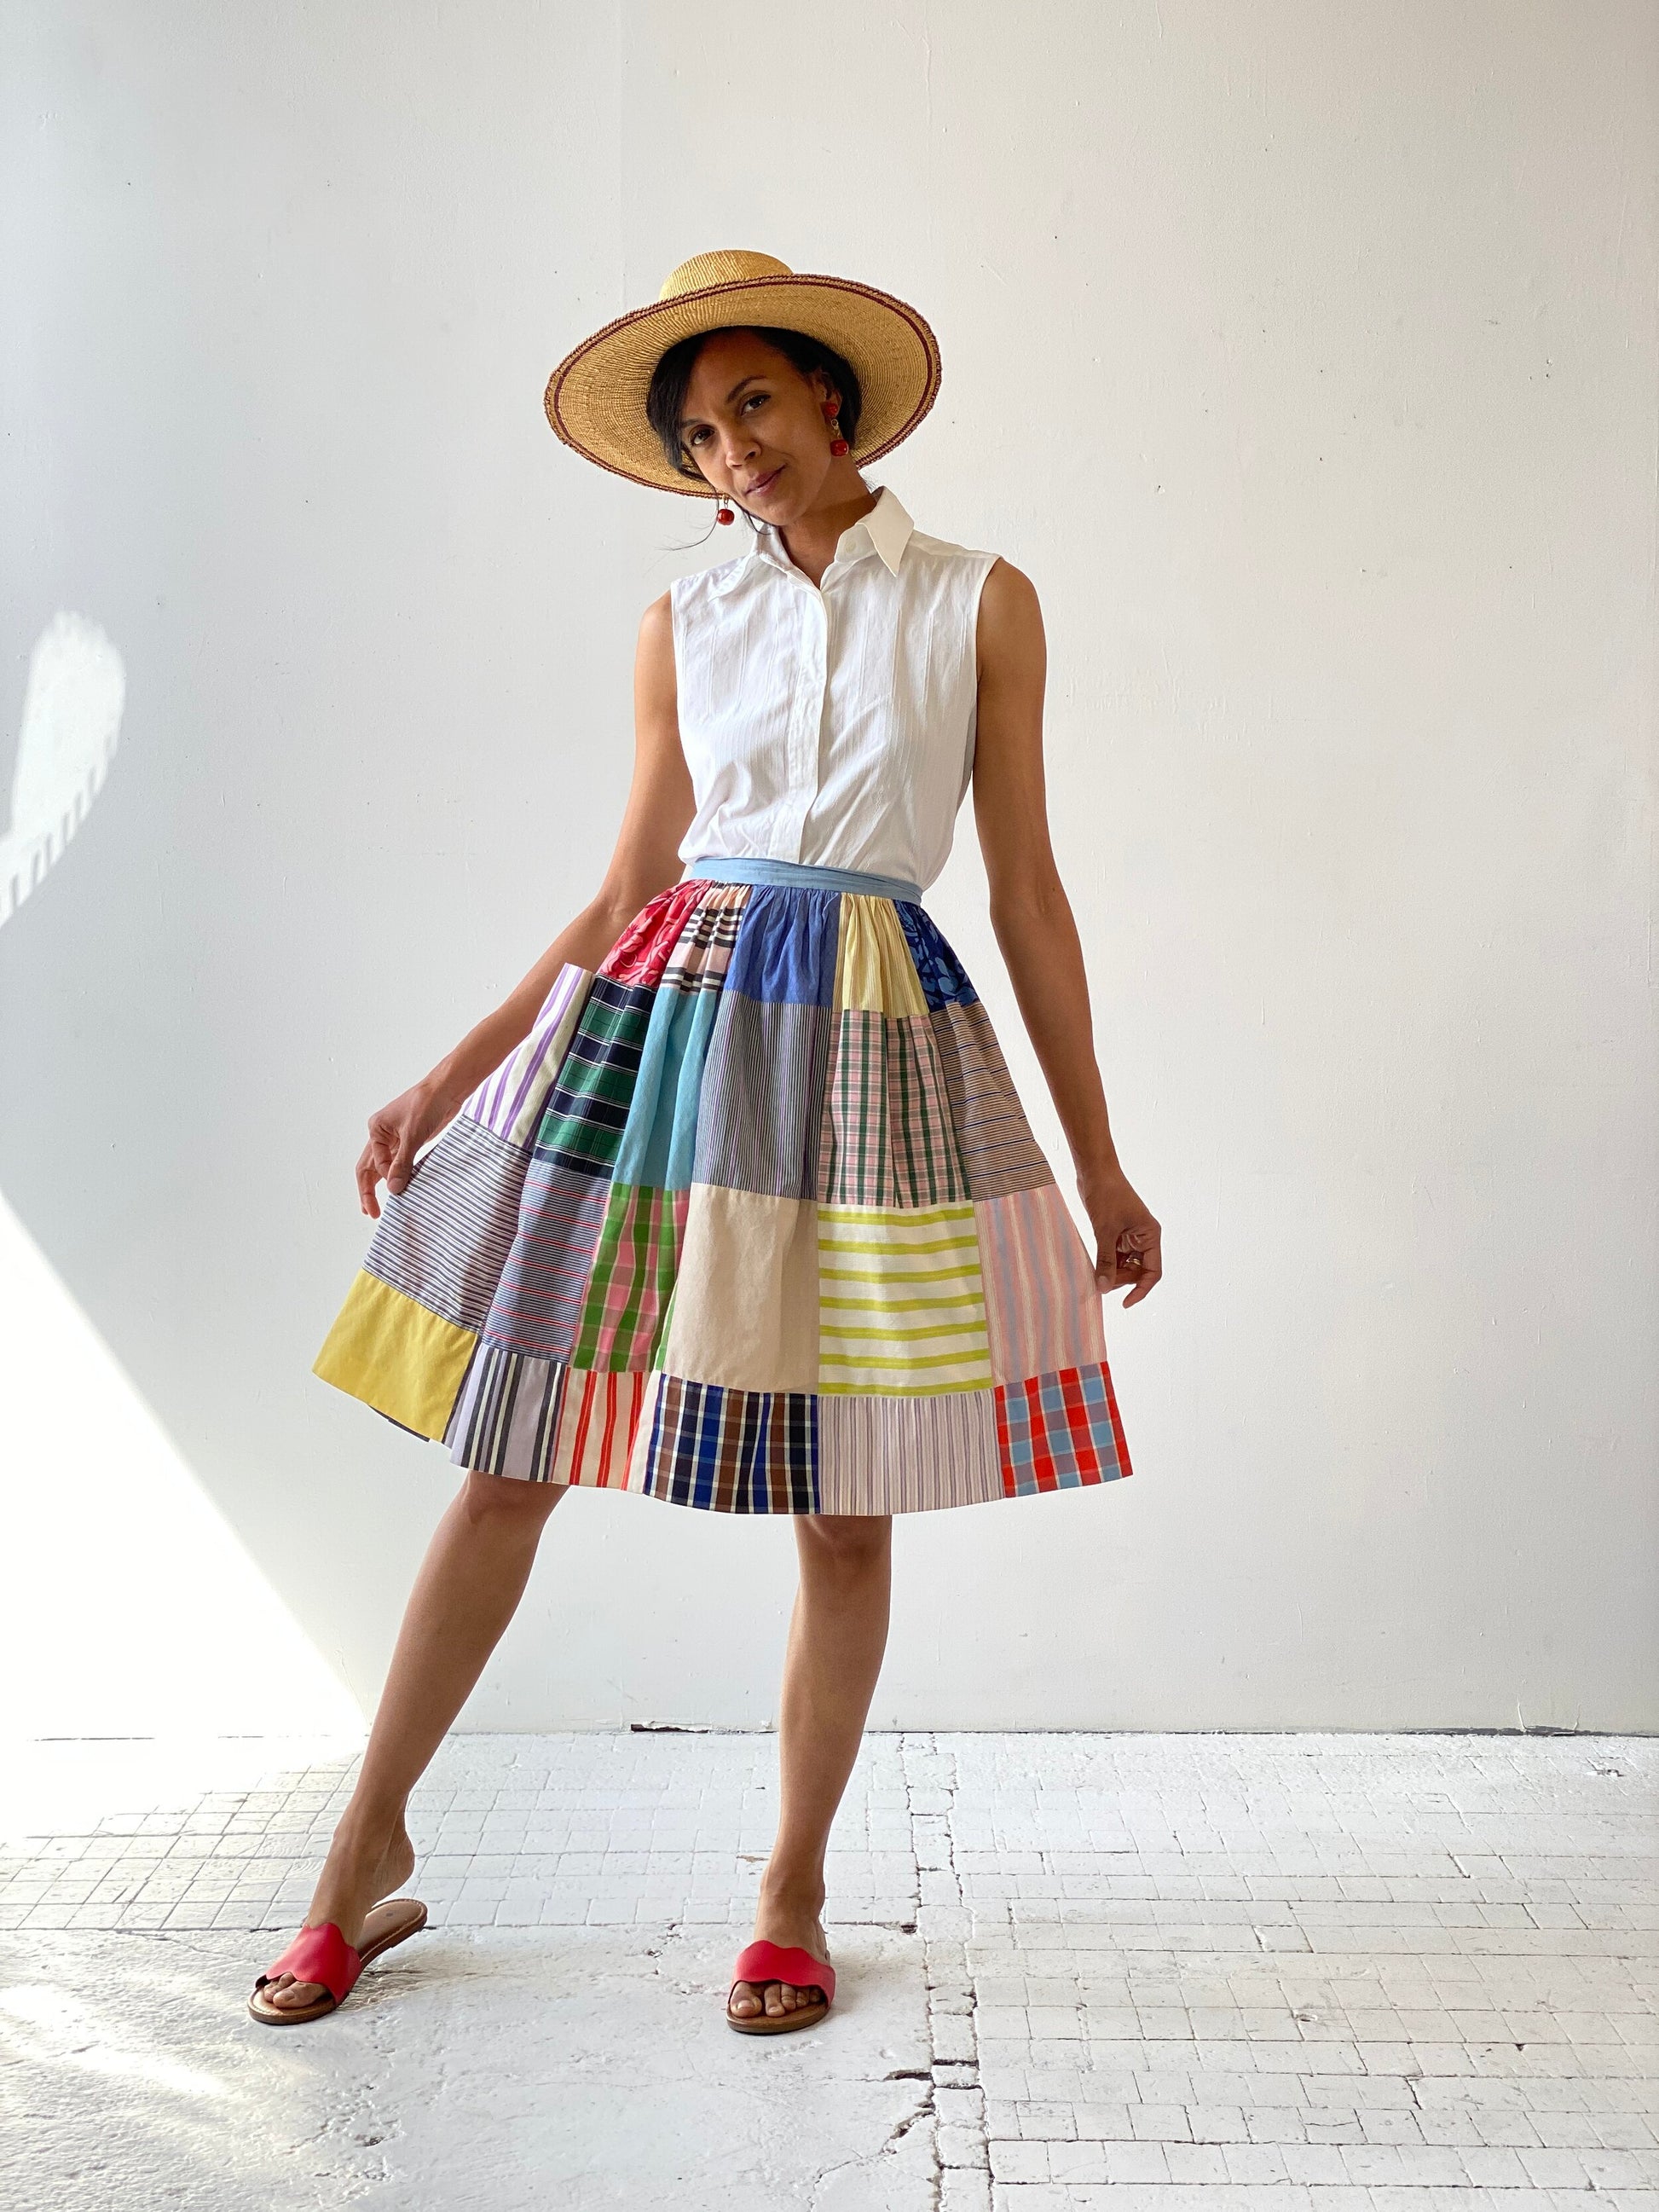 Turn Your Quilt Into A Skirt With Pockets